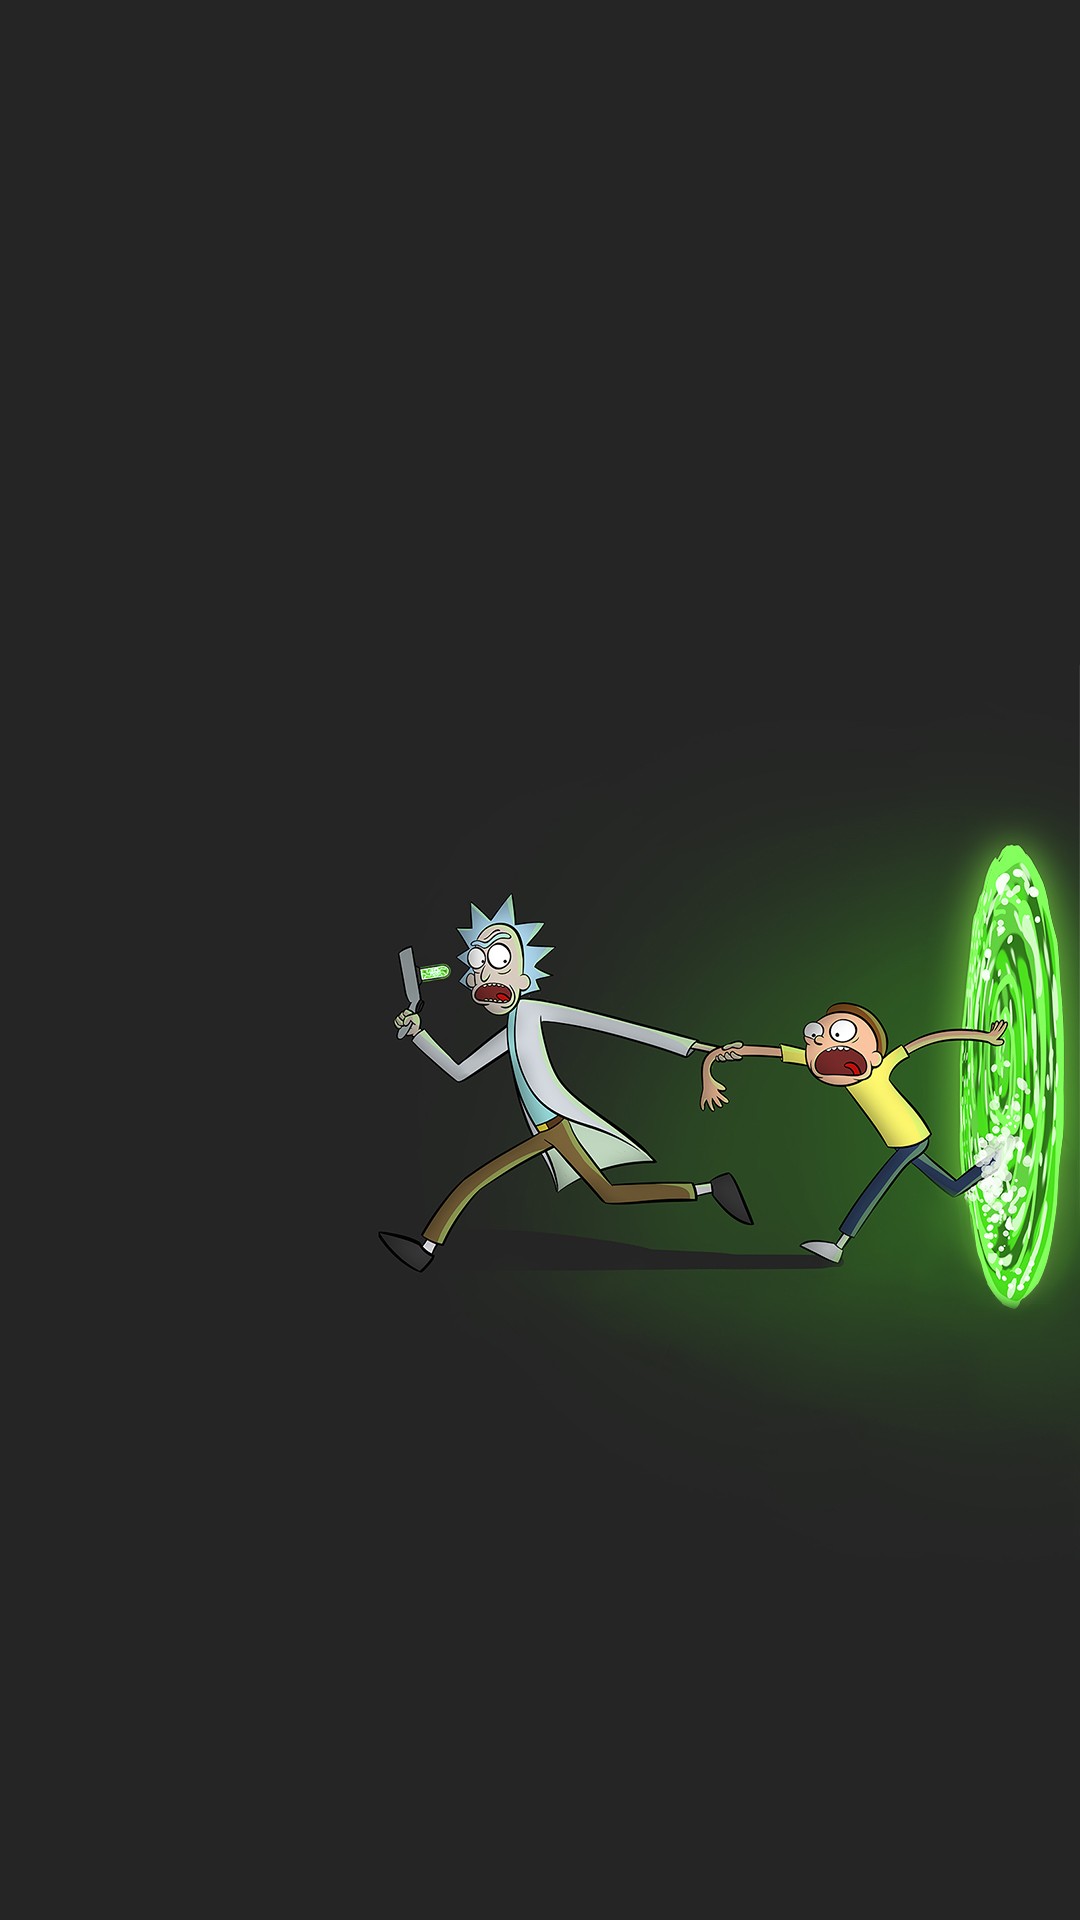 Rick and Morty iPhone 7 Plus Wallpaper with image resolution 1080x1920 pixel. You can use this wallpaper as background for your desktop Computer Screensavers, Android or iPhone smartphones